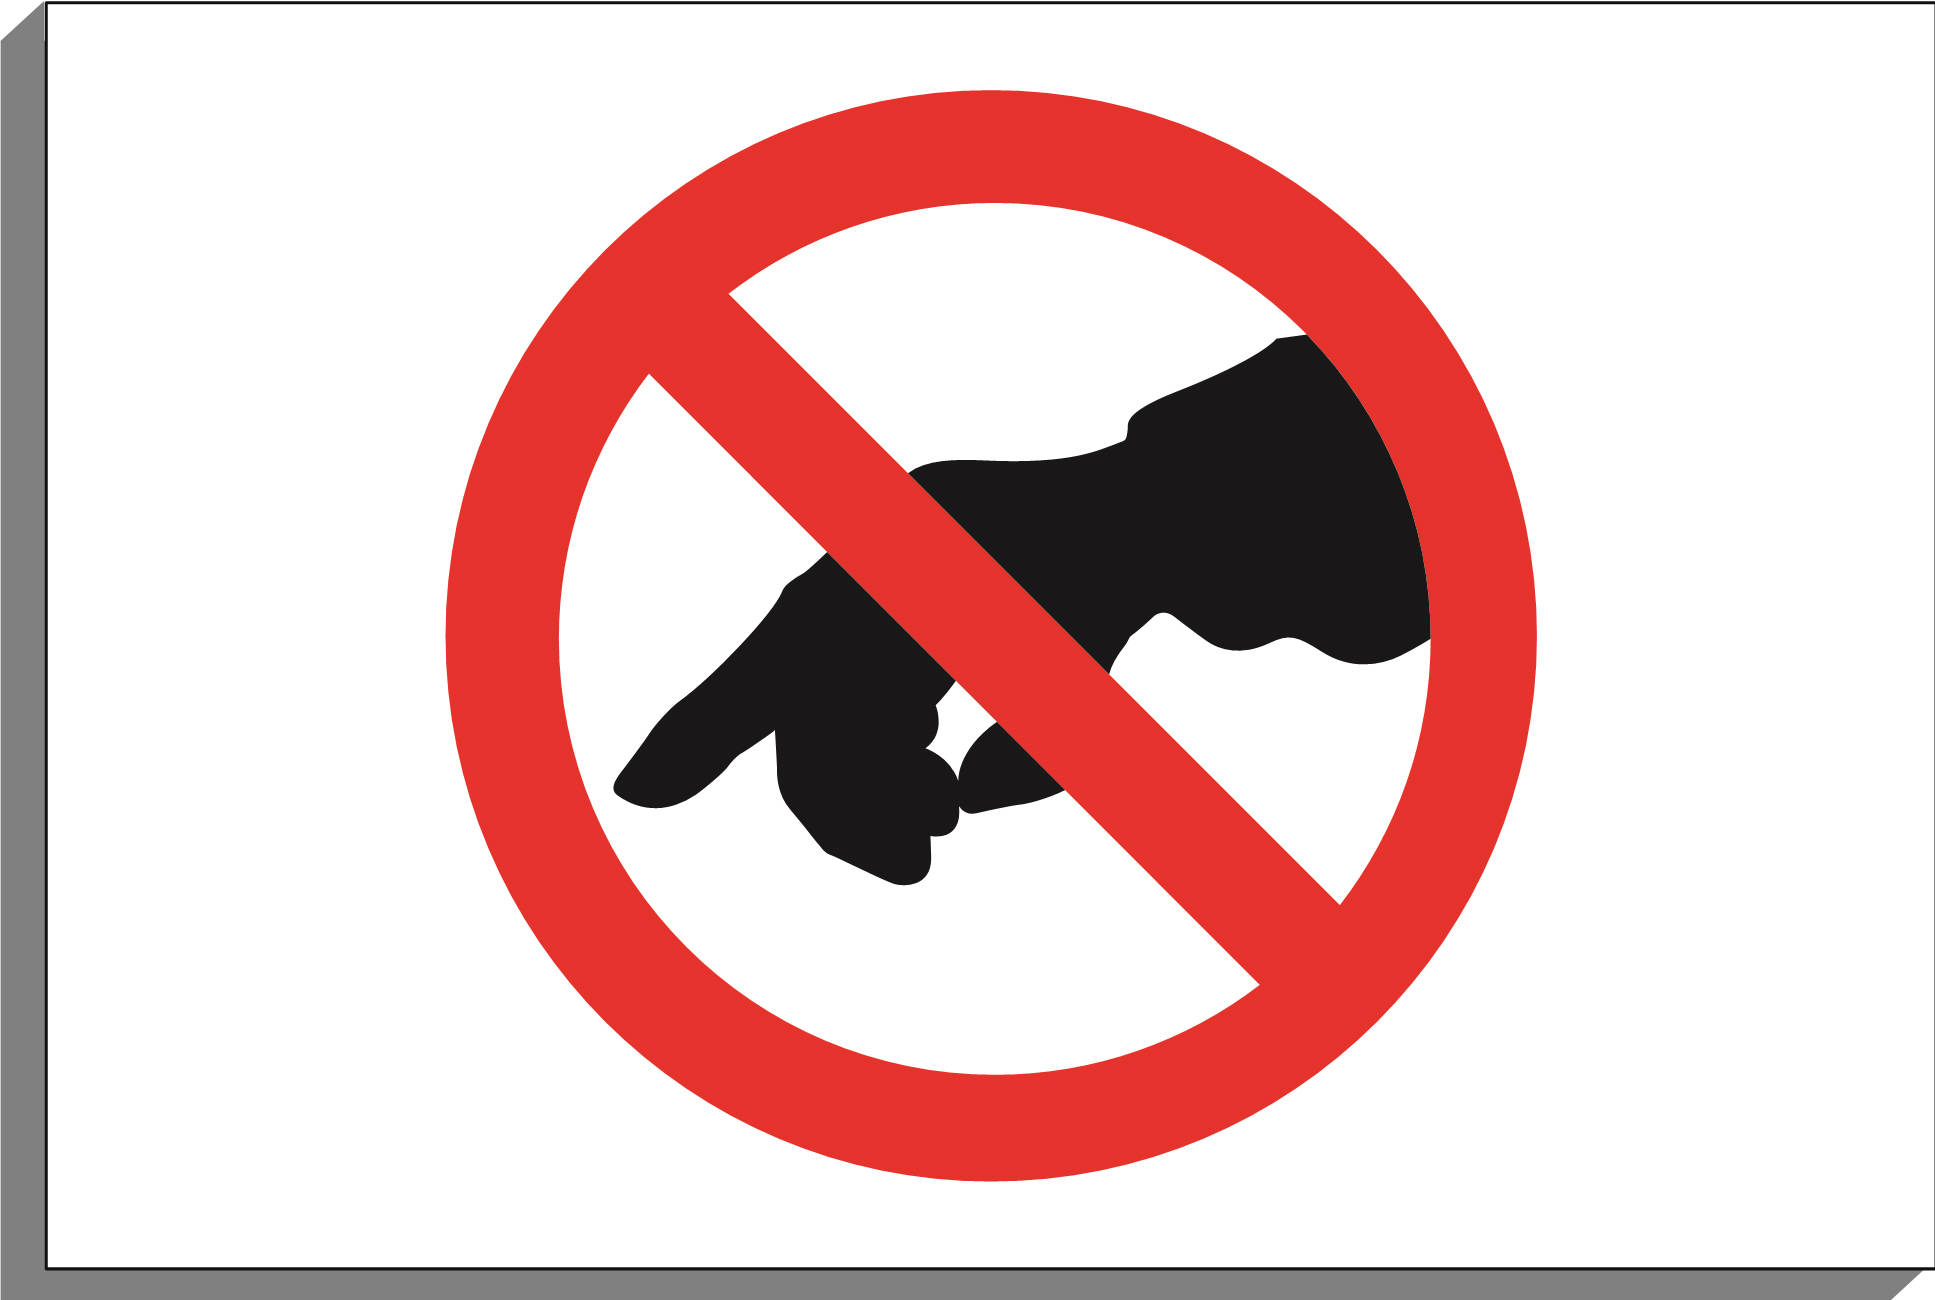 Clip Arts Related To : sign please do not touch. view all No Touching Cli.....